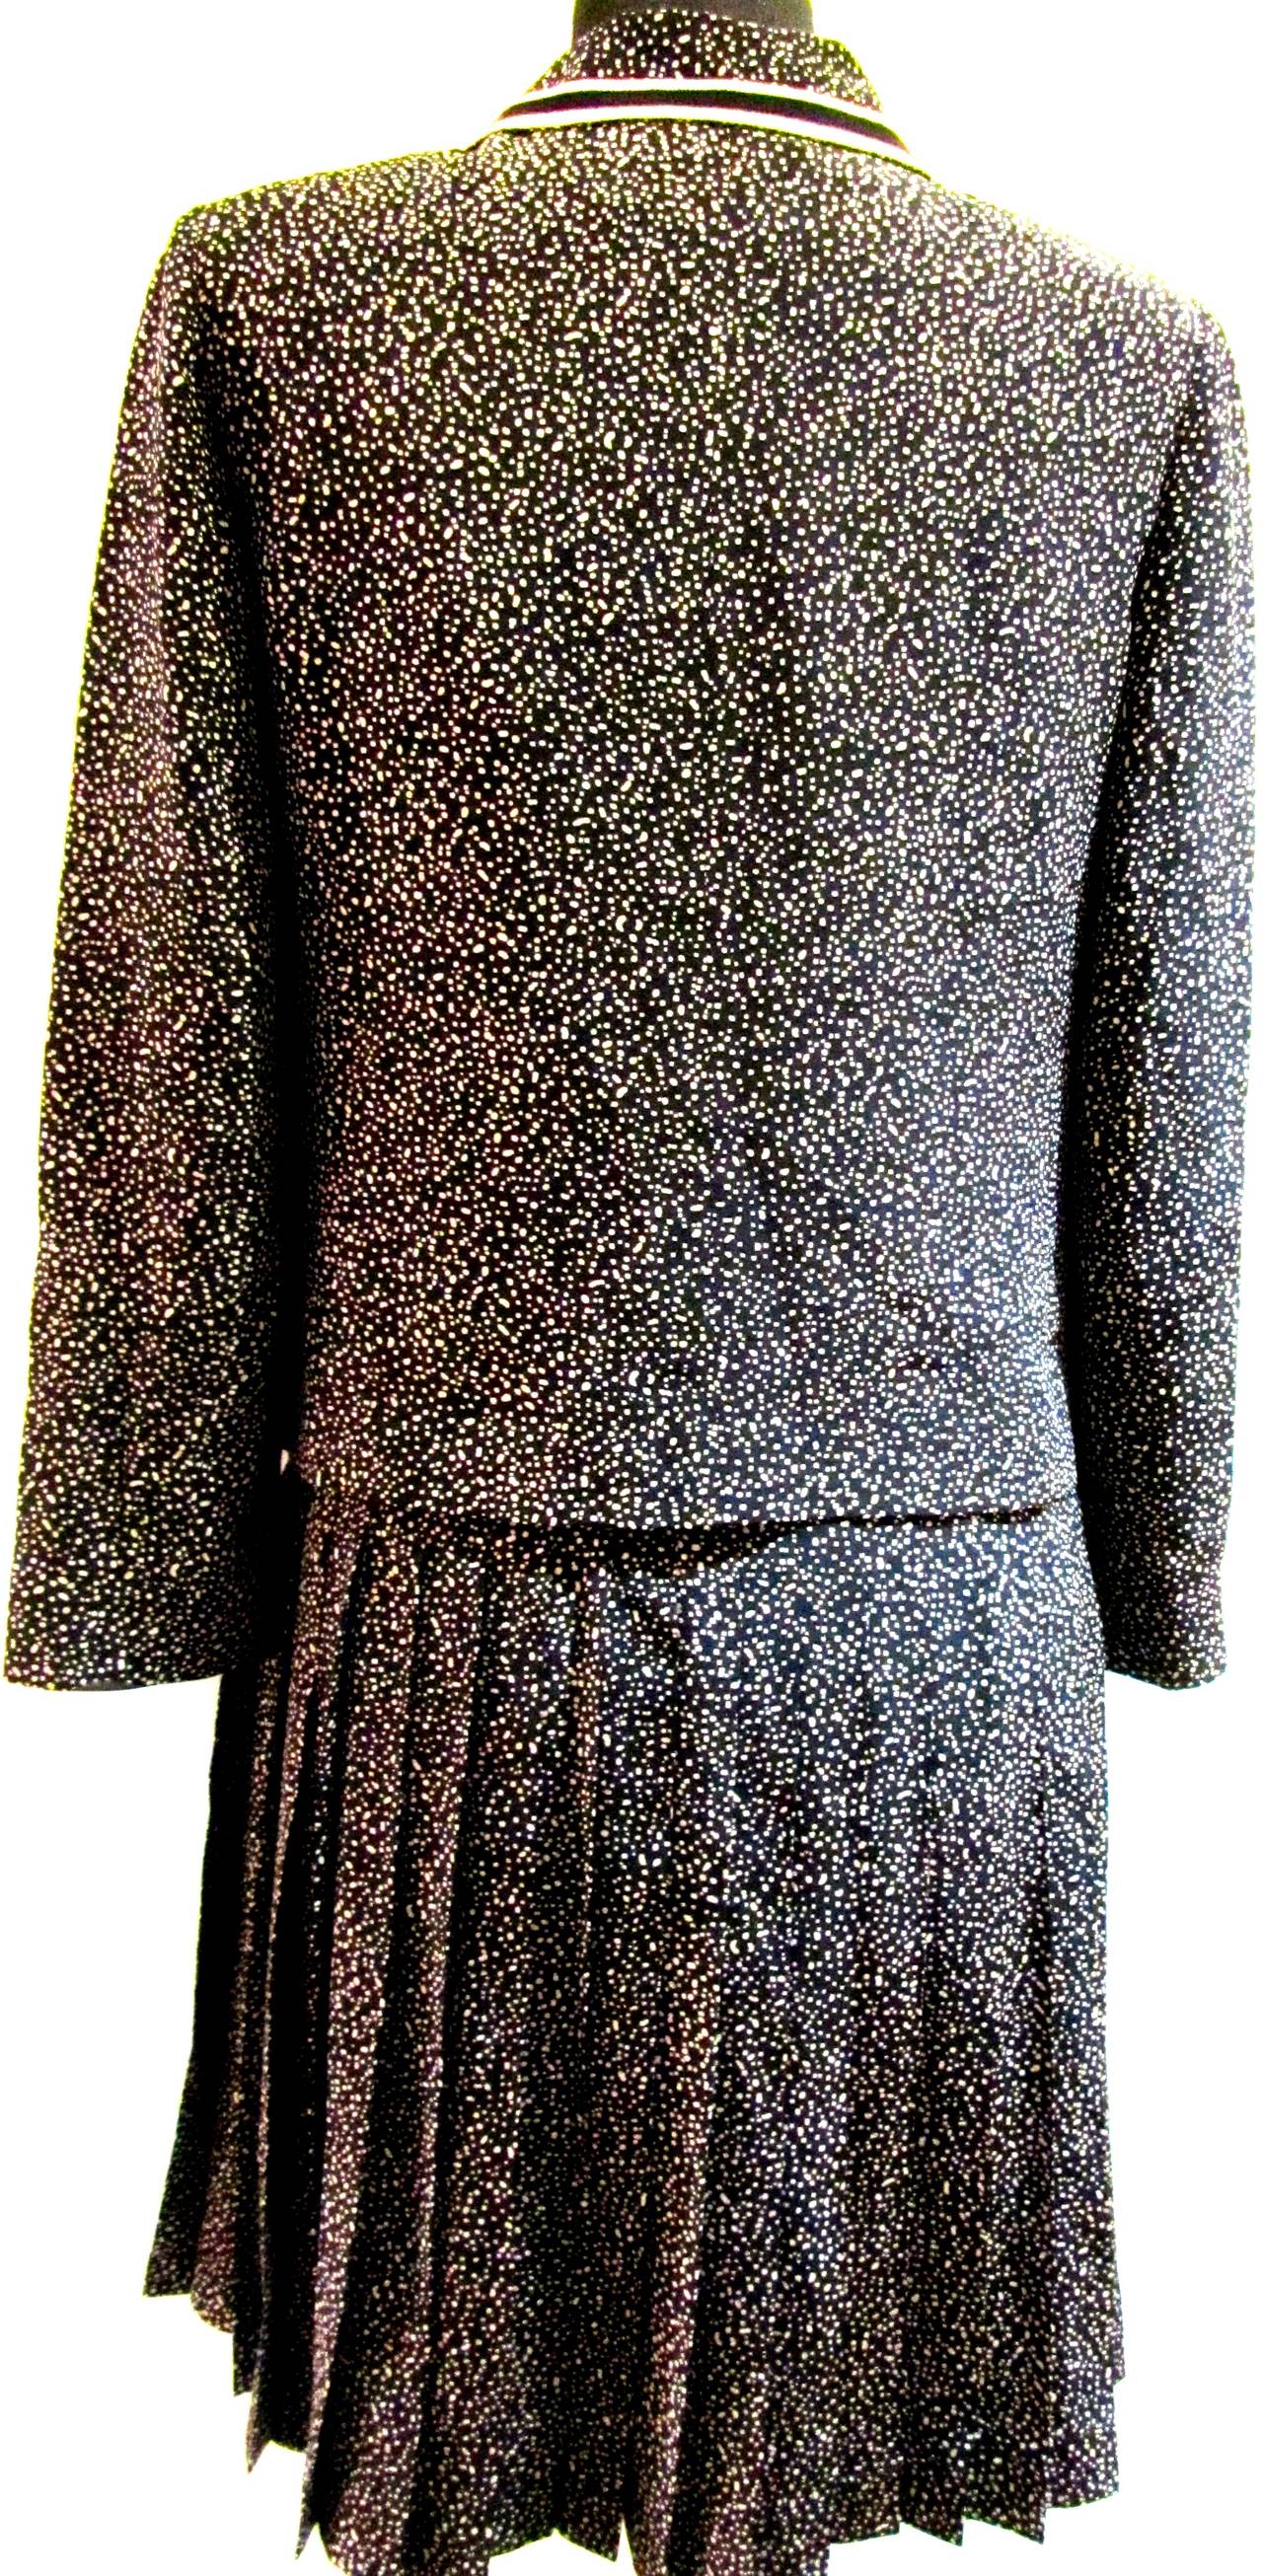 Vintage Chanel Boutique silk suit. Cream colored dots on black fabric with stripe trim. The suit has rare iconic gold and black lion's head buttons. The elastic waist band of the skirt has been replaced by Chanel. Rare suit from the 1970's that is